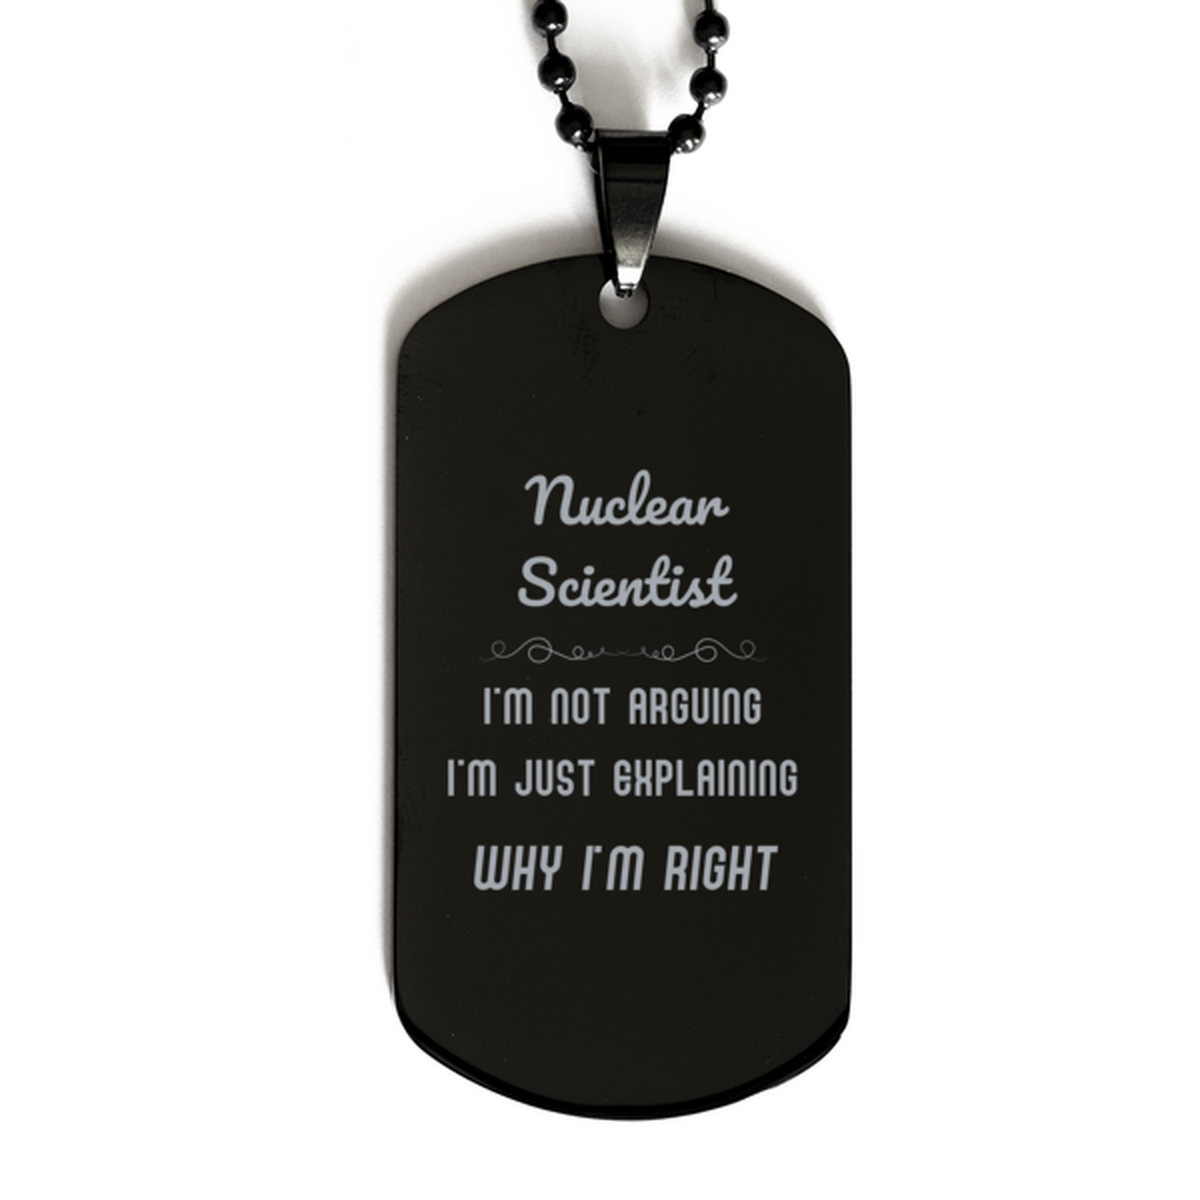 Nuclear Scientist I'm not Arguing. I'm Just Explaining Why I'm RIGHT Black Dog Tag, Funny Saying Quote Nuclear Scientist Gifts For Nuclear Scientist Graduation Birthday Christmas Gifts for Men Women Coworker